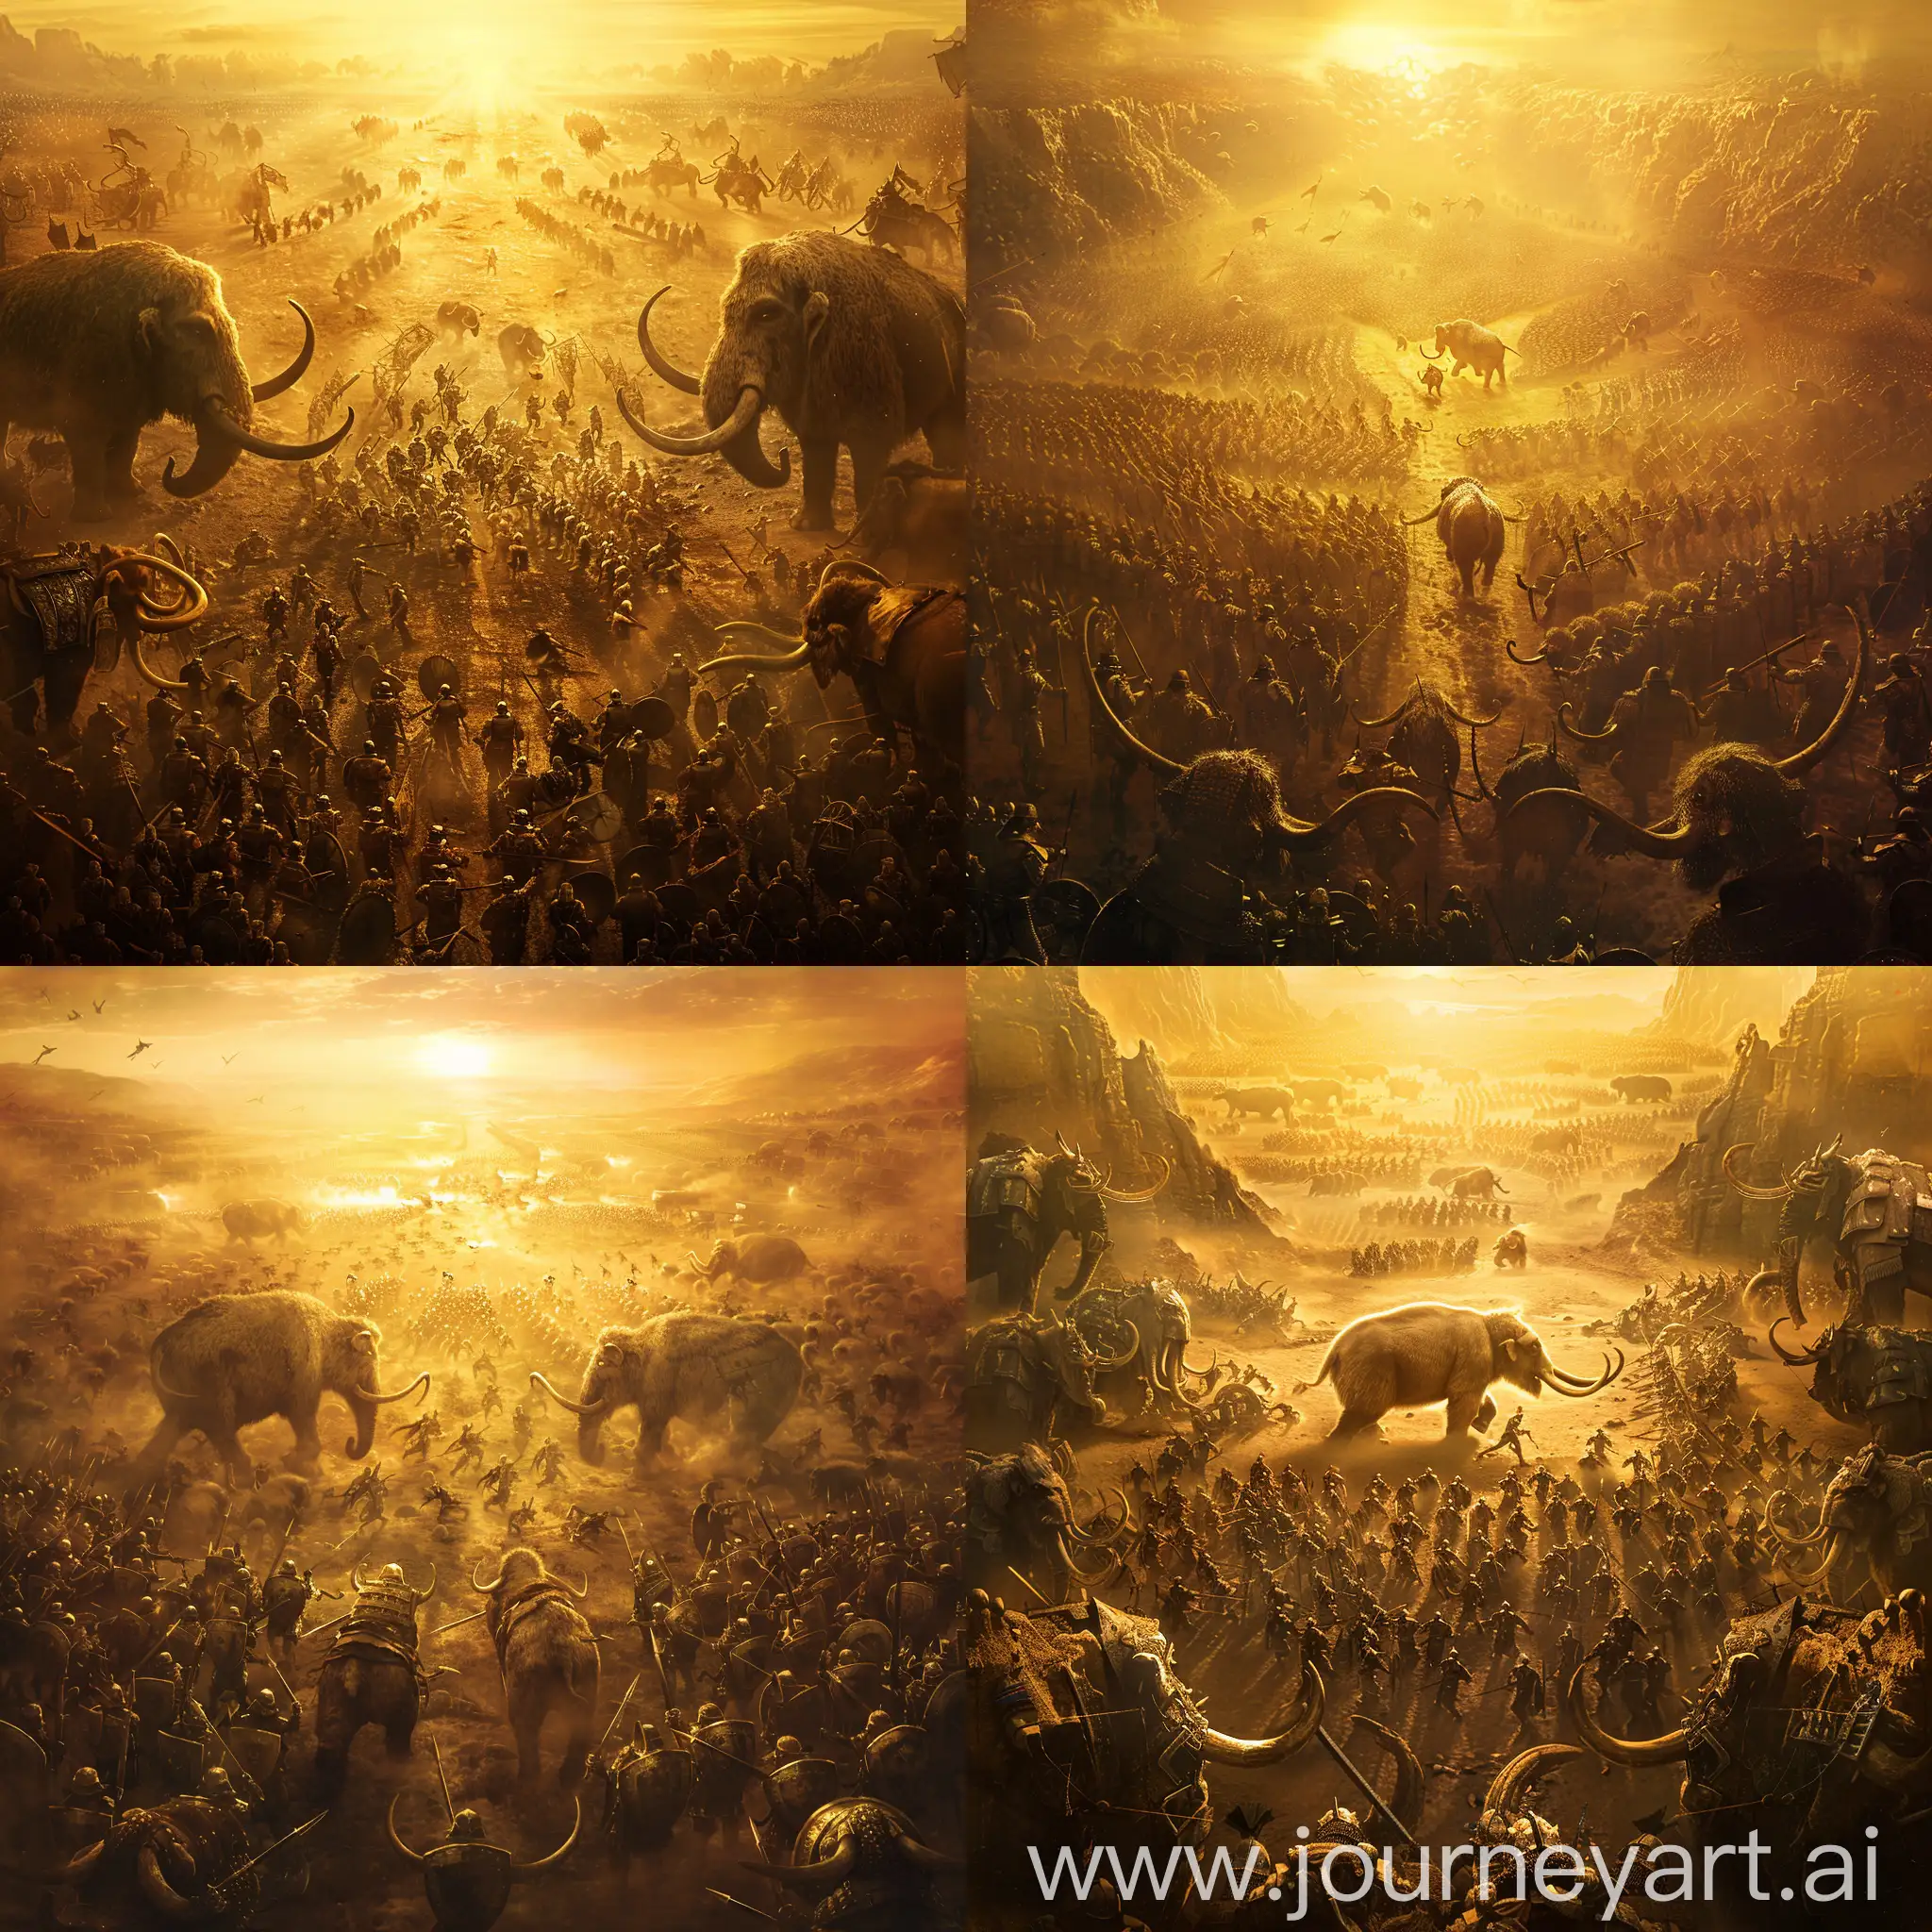 A vast battlefield bathed in the golden light of dawn, where two phalanxes of heavily armored soldiers clash, with woolly mammoths charging through the center.